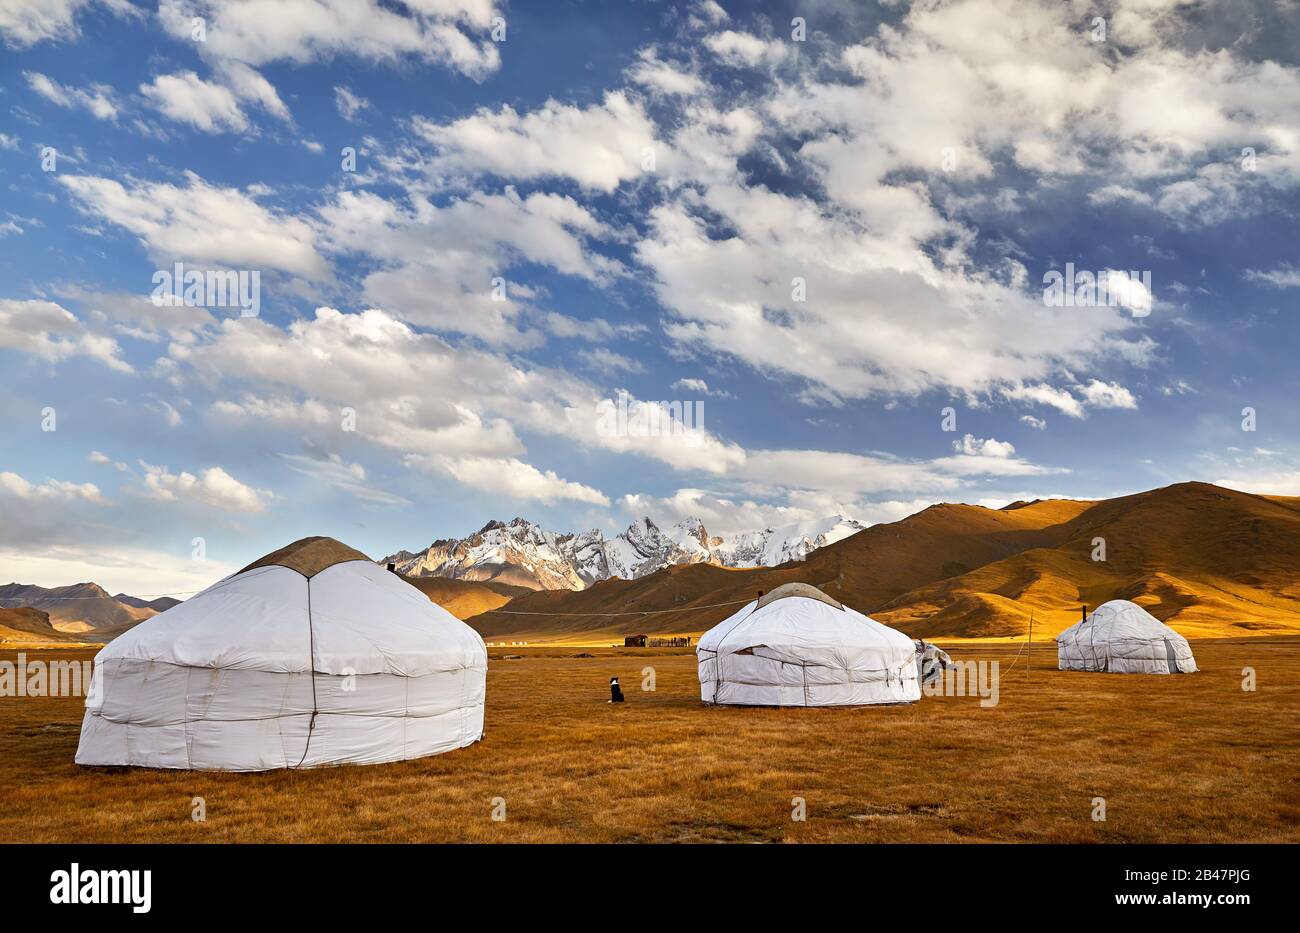 Yurt nomadic houses camp at mountain valley in Central Asia Stock Photo